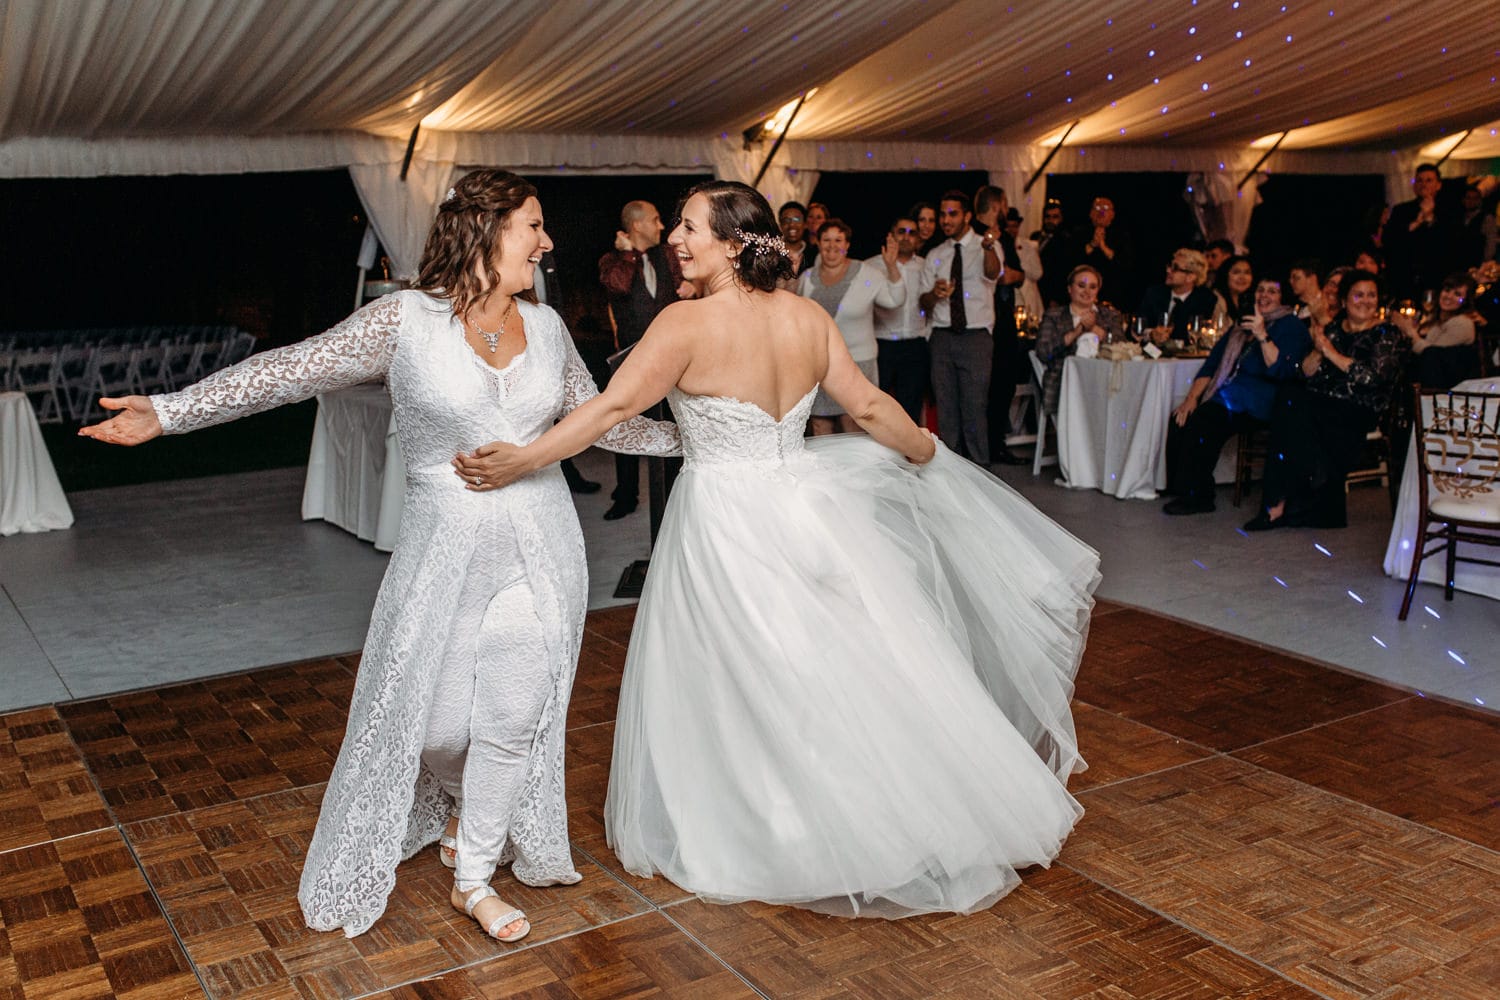 two brides first dance at lgbtq wedding vancouver